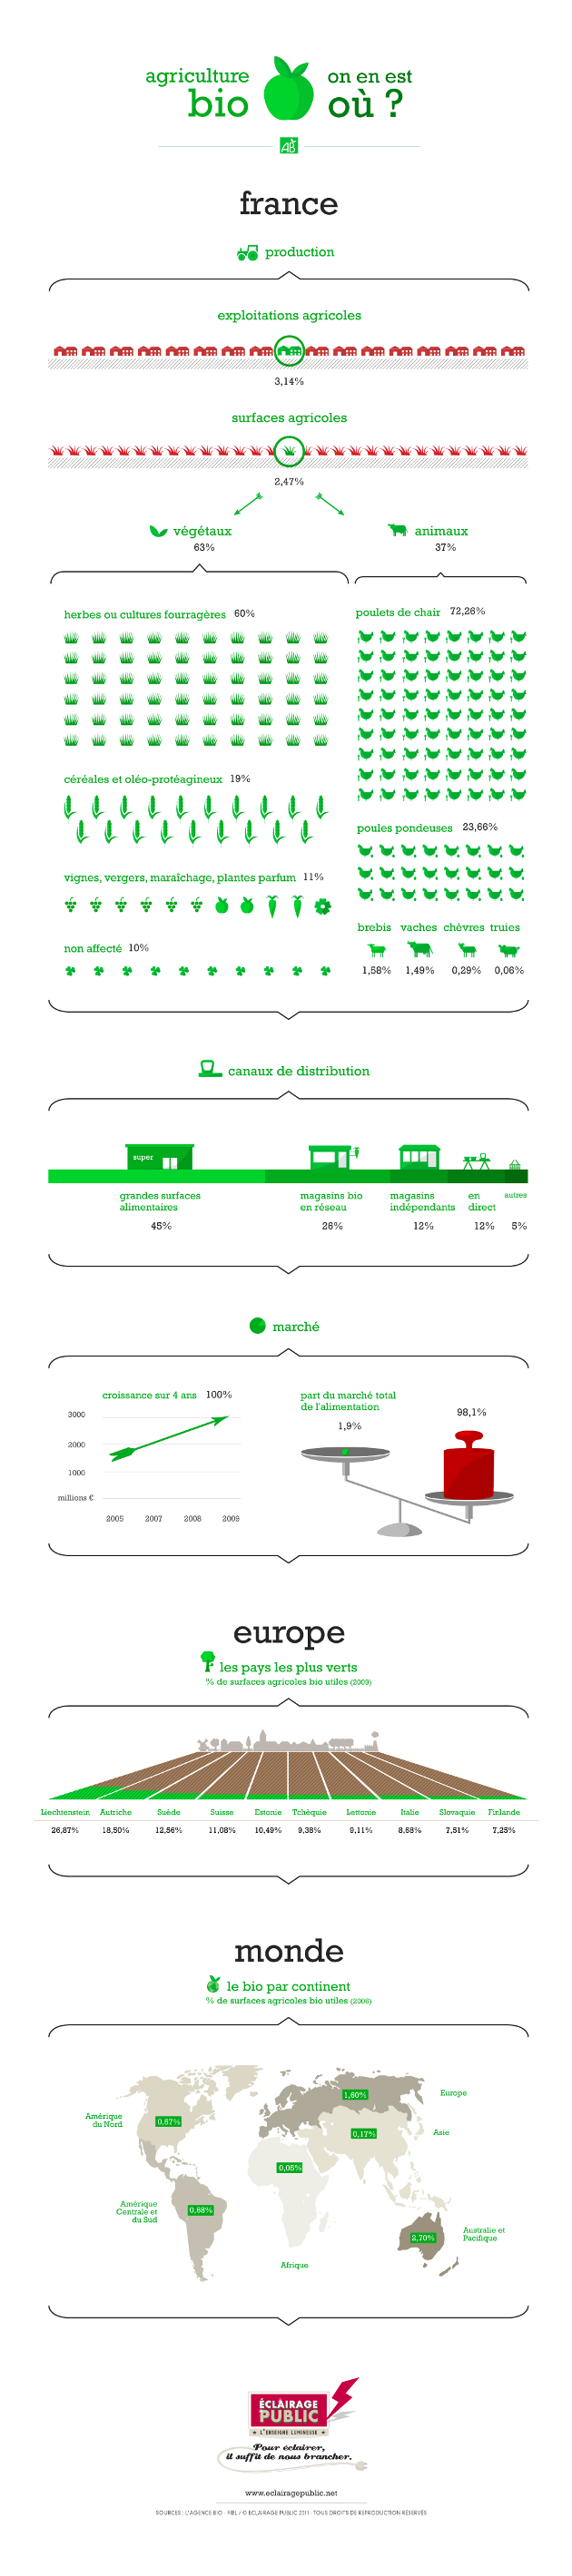 Infographie : Agriculture Bio